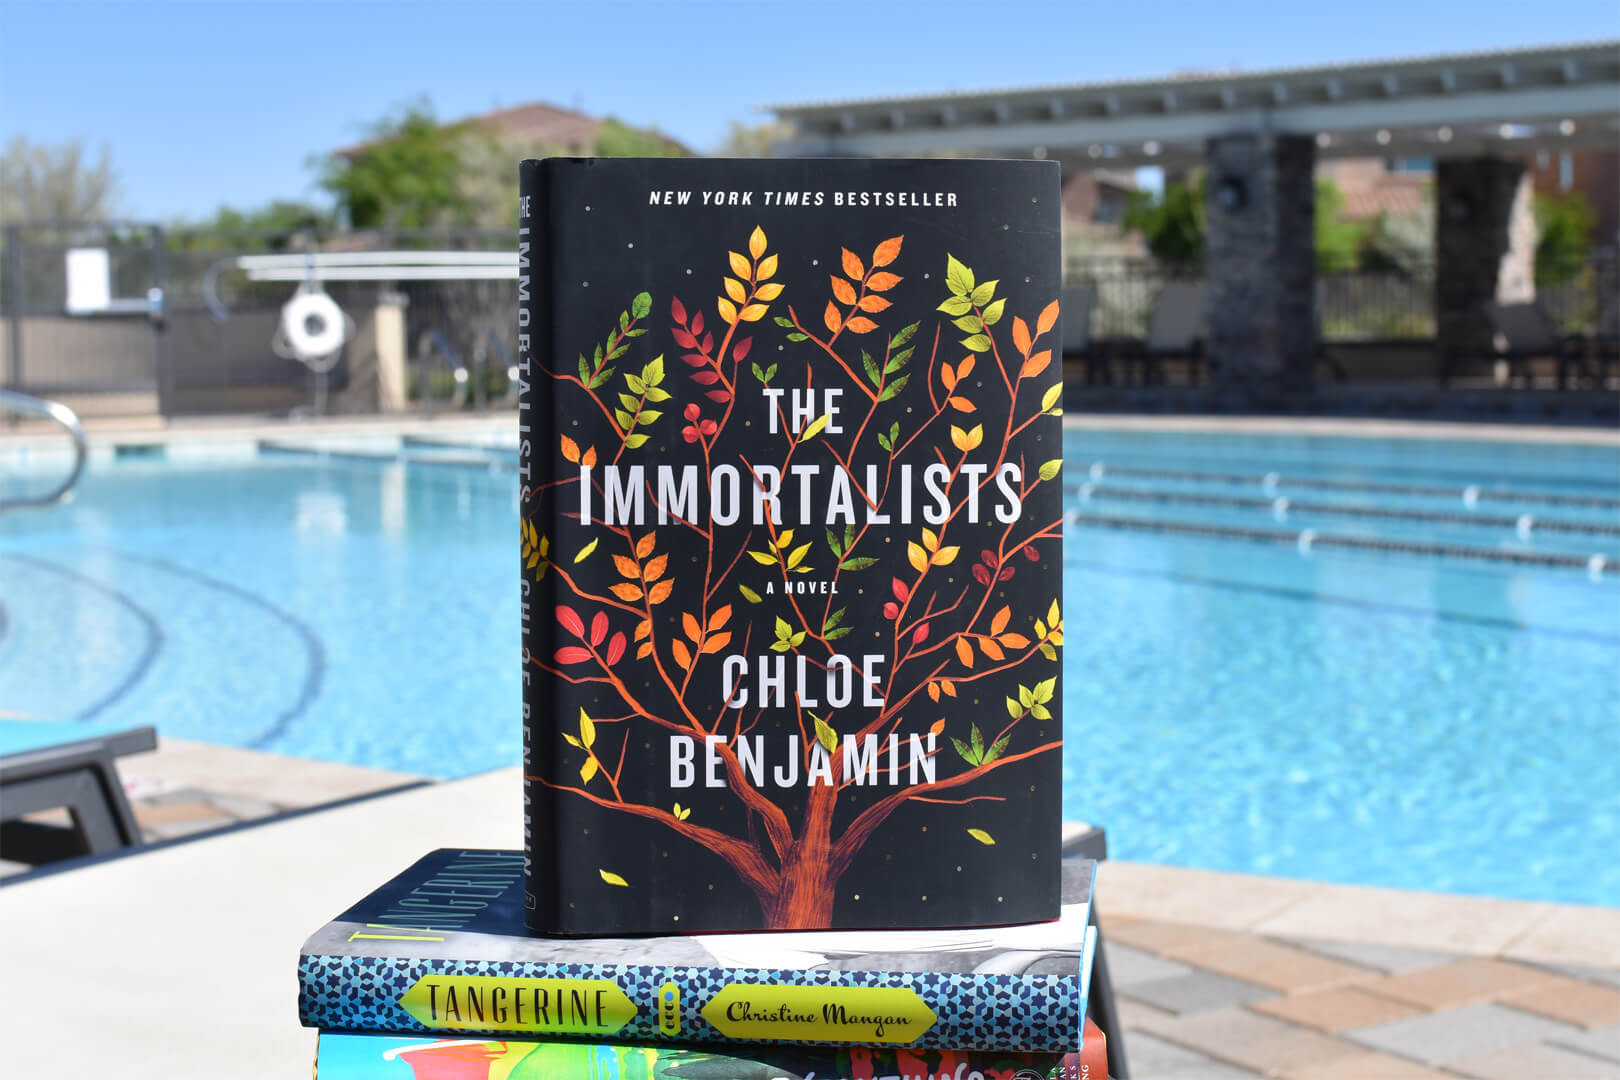 Review: The Immortalists by Chloe Benjamin